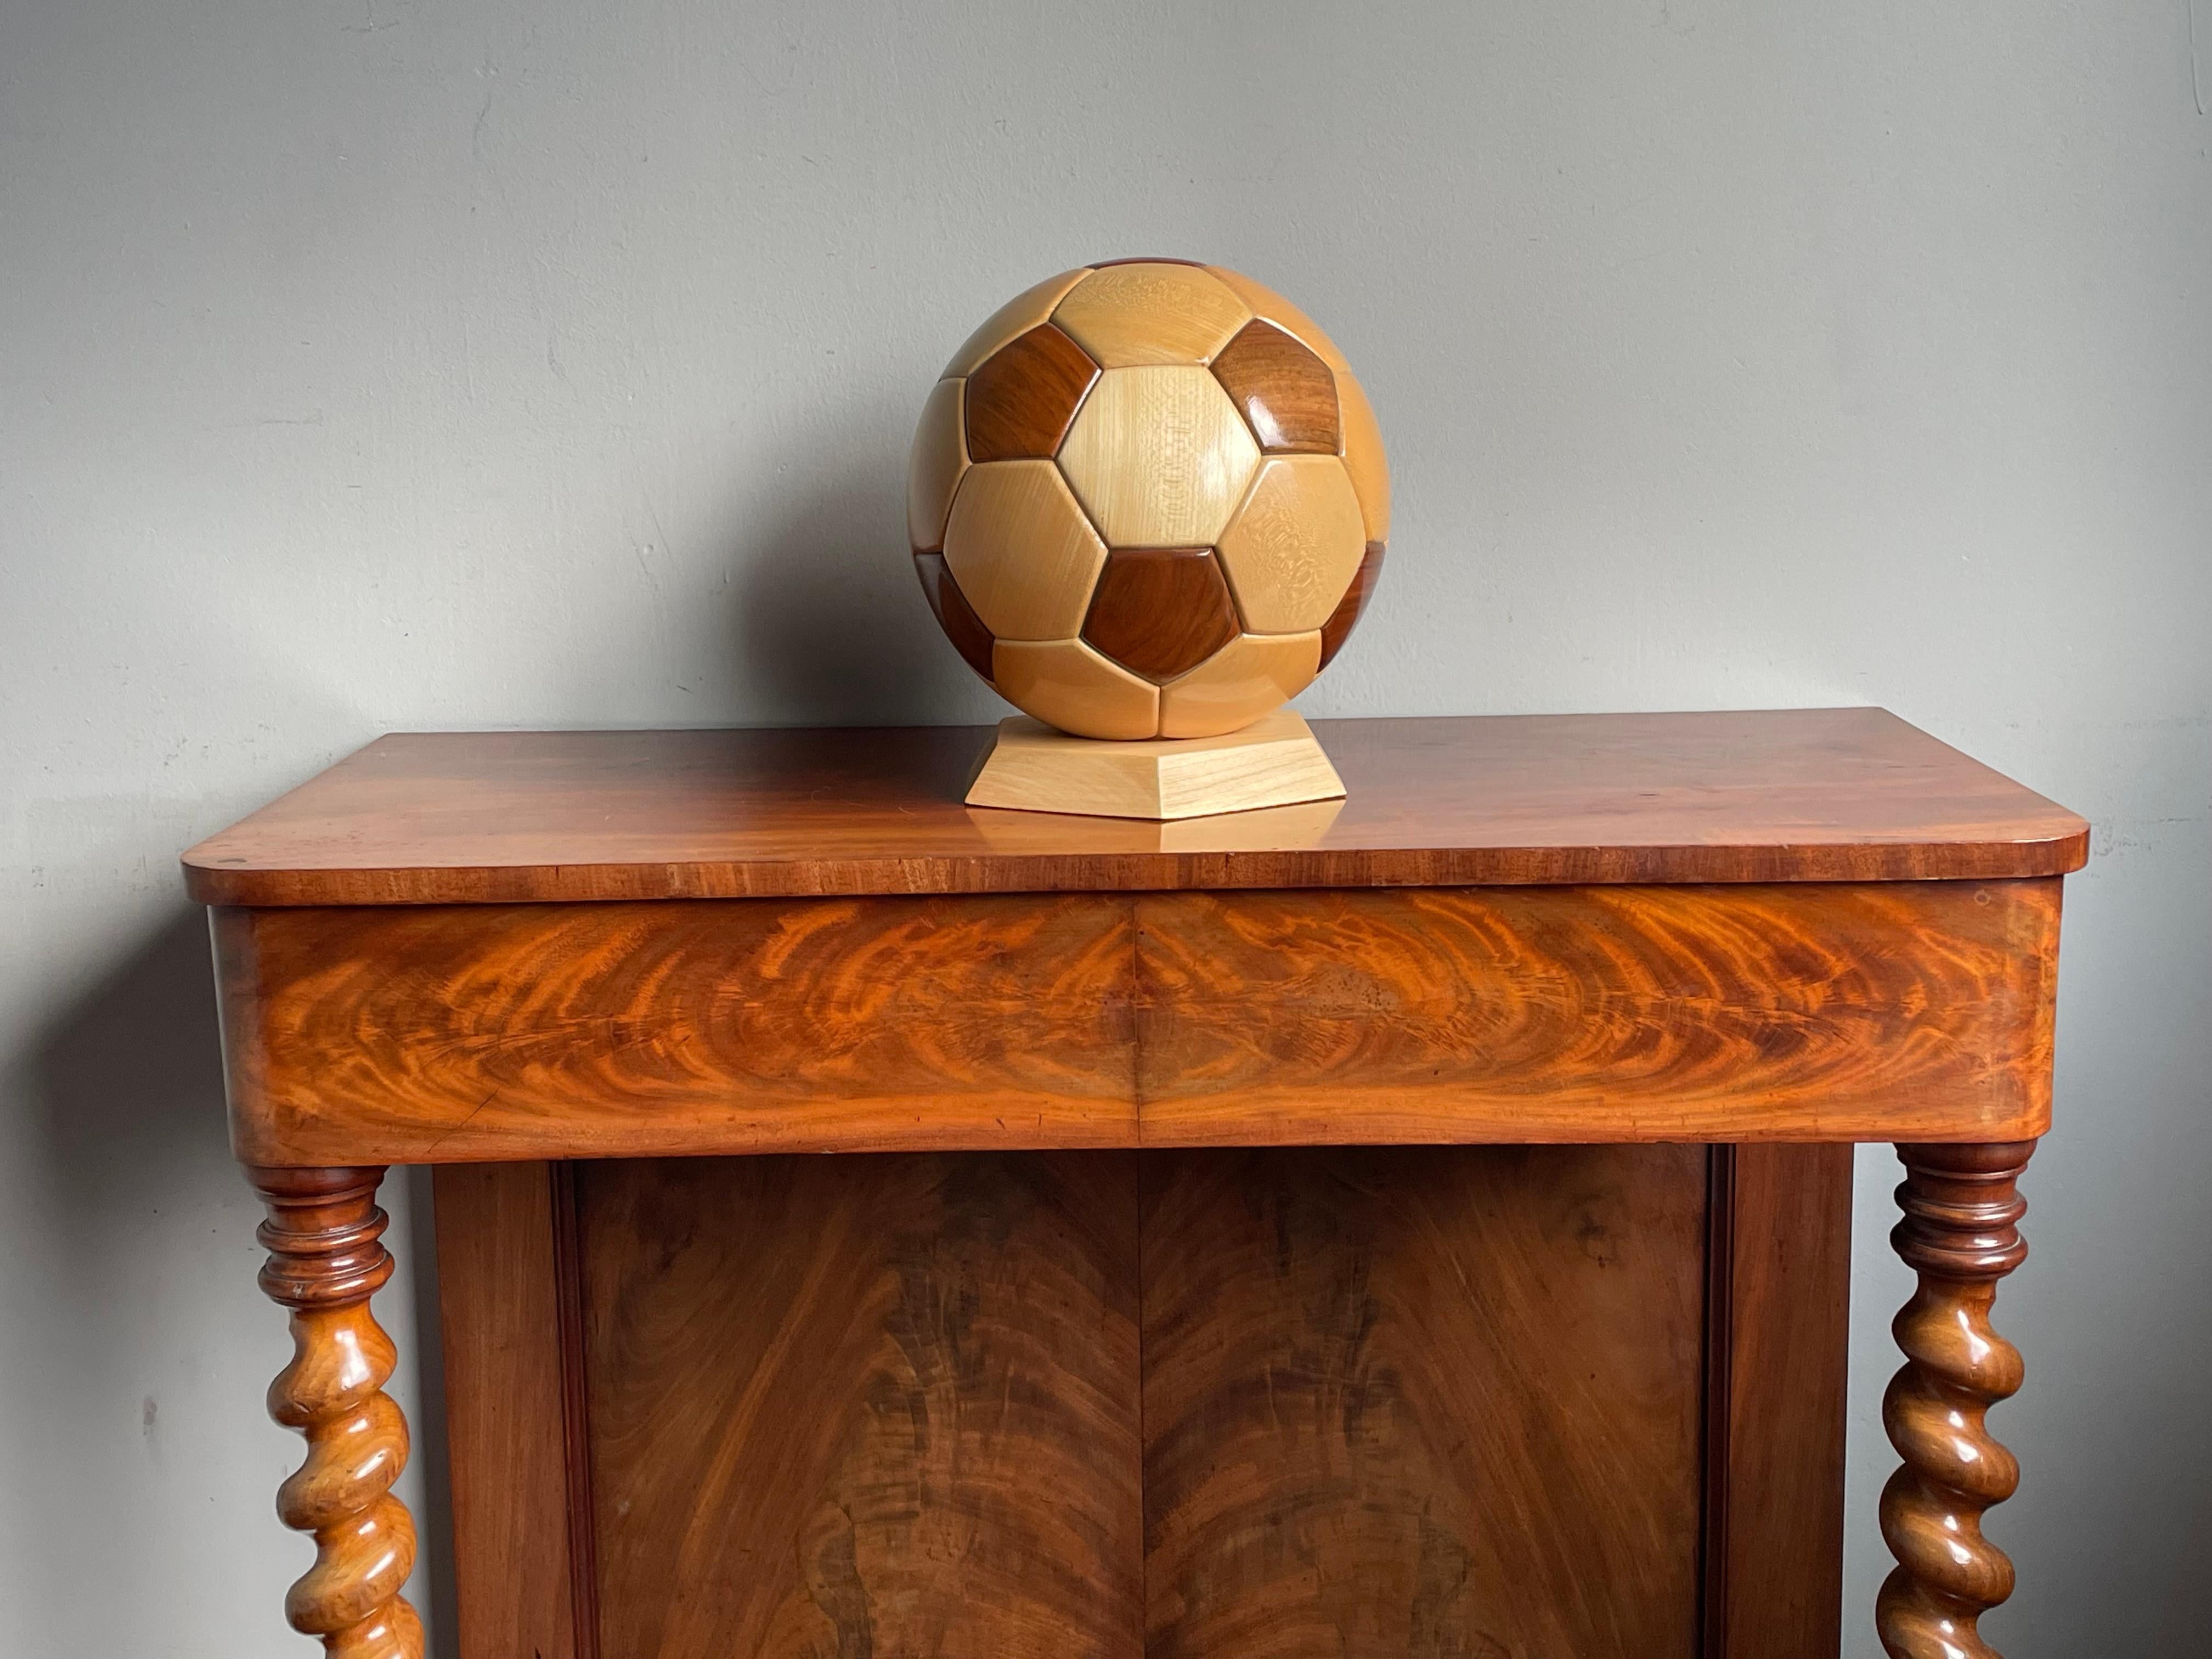 Hand-Carved All Handmade Vintage 1980s Wooden Soccer Ball / Football Sculpture / Desk Piece For Sale